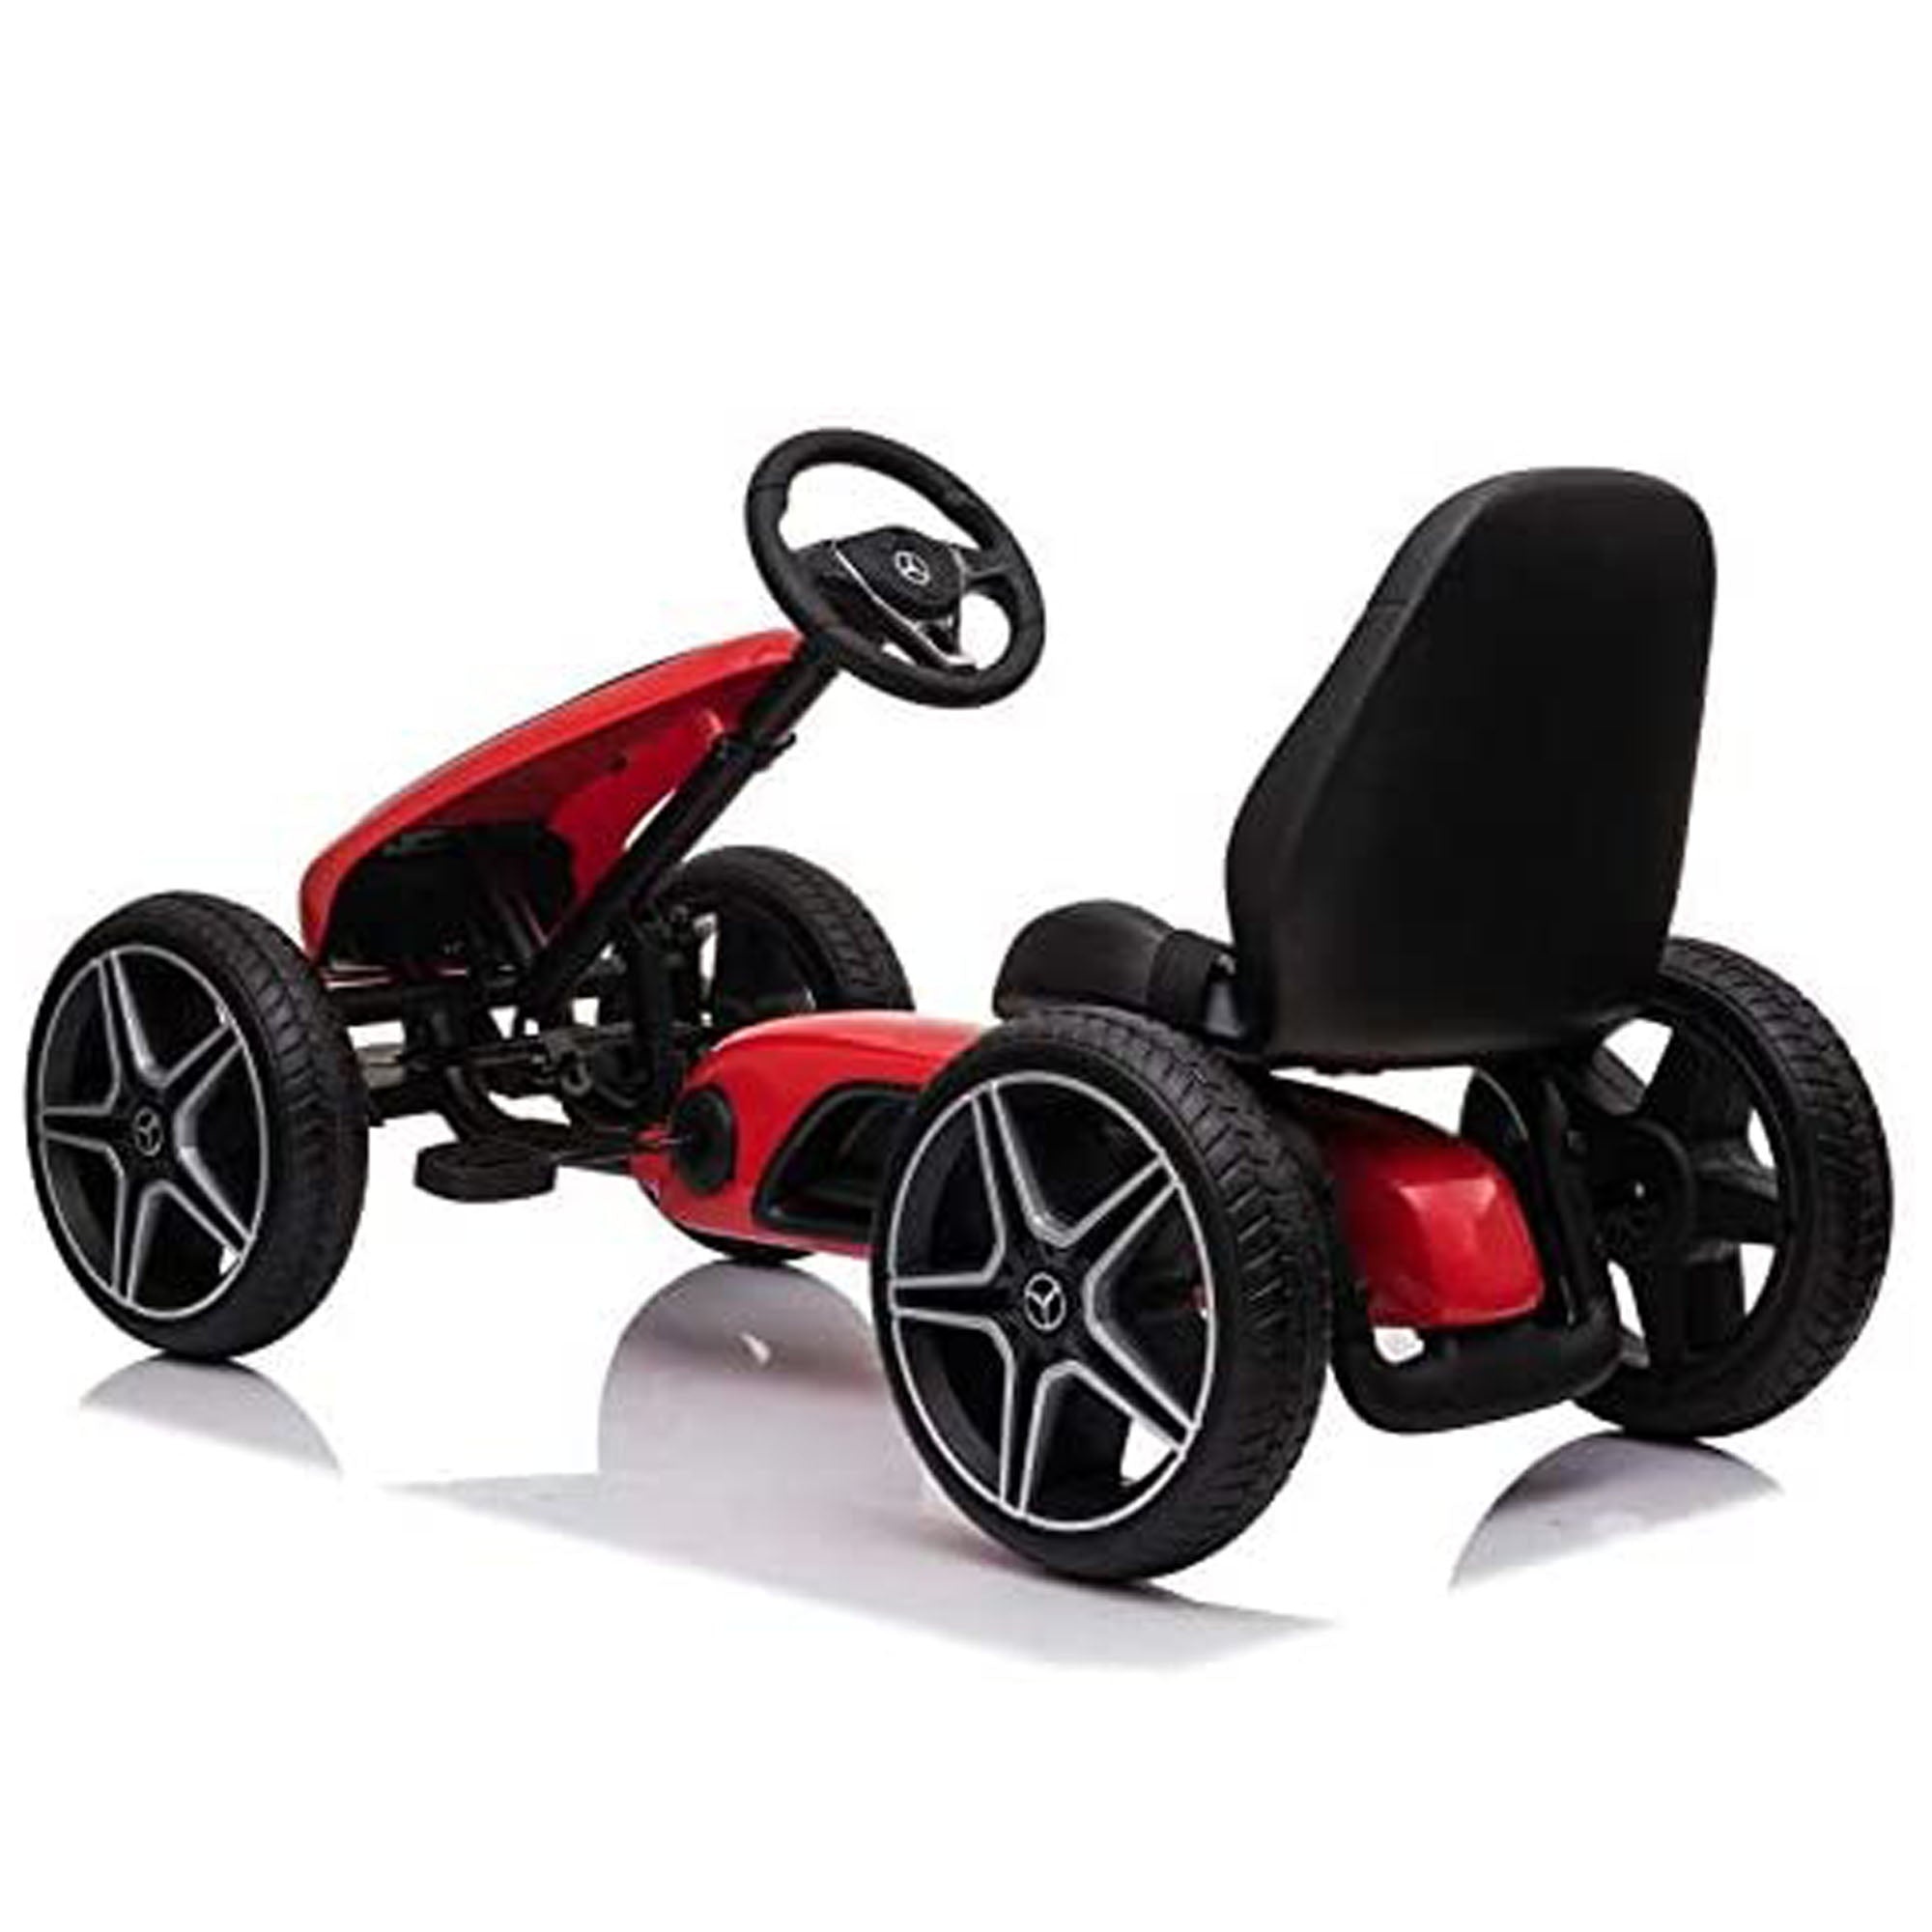 Ride On XMX-610 Pedal Go Kart 4 Wheels Red